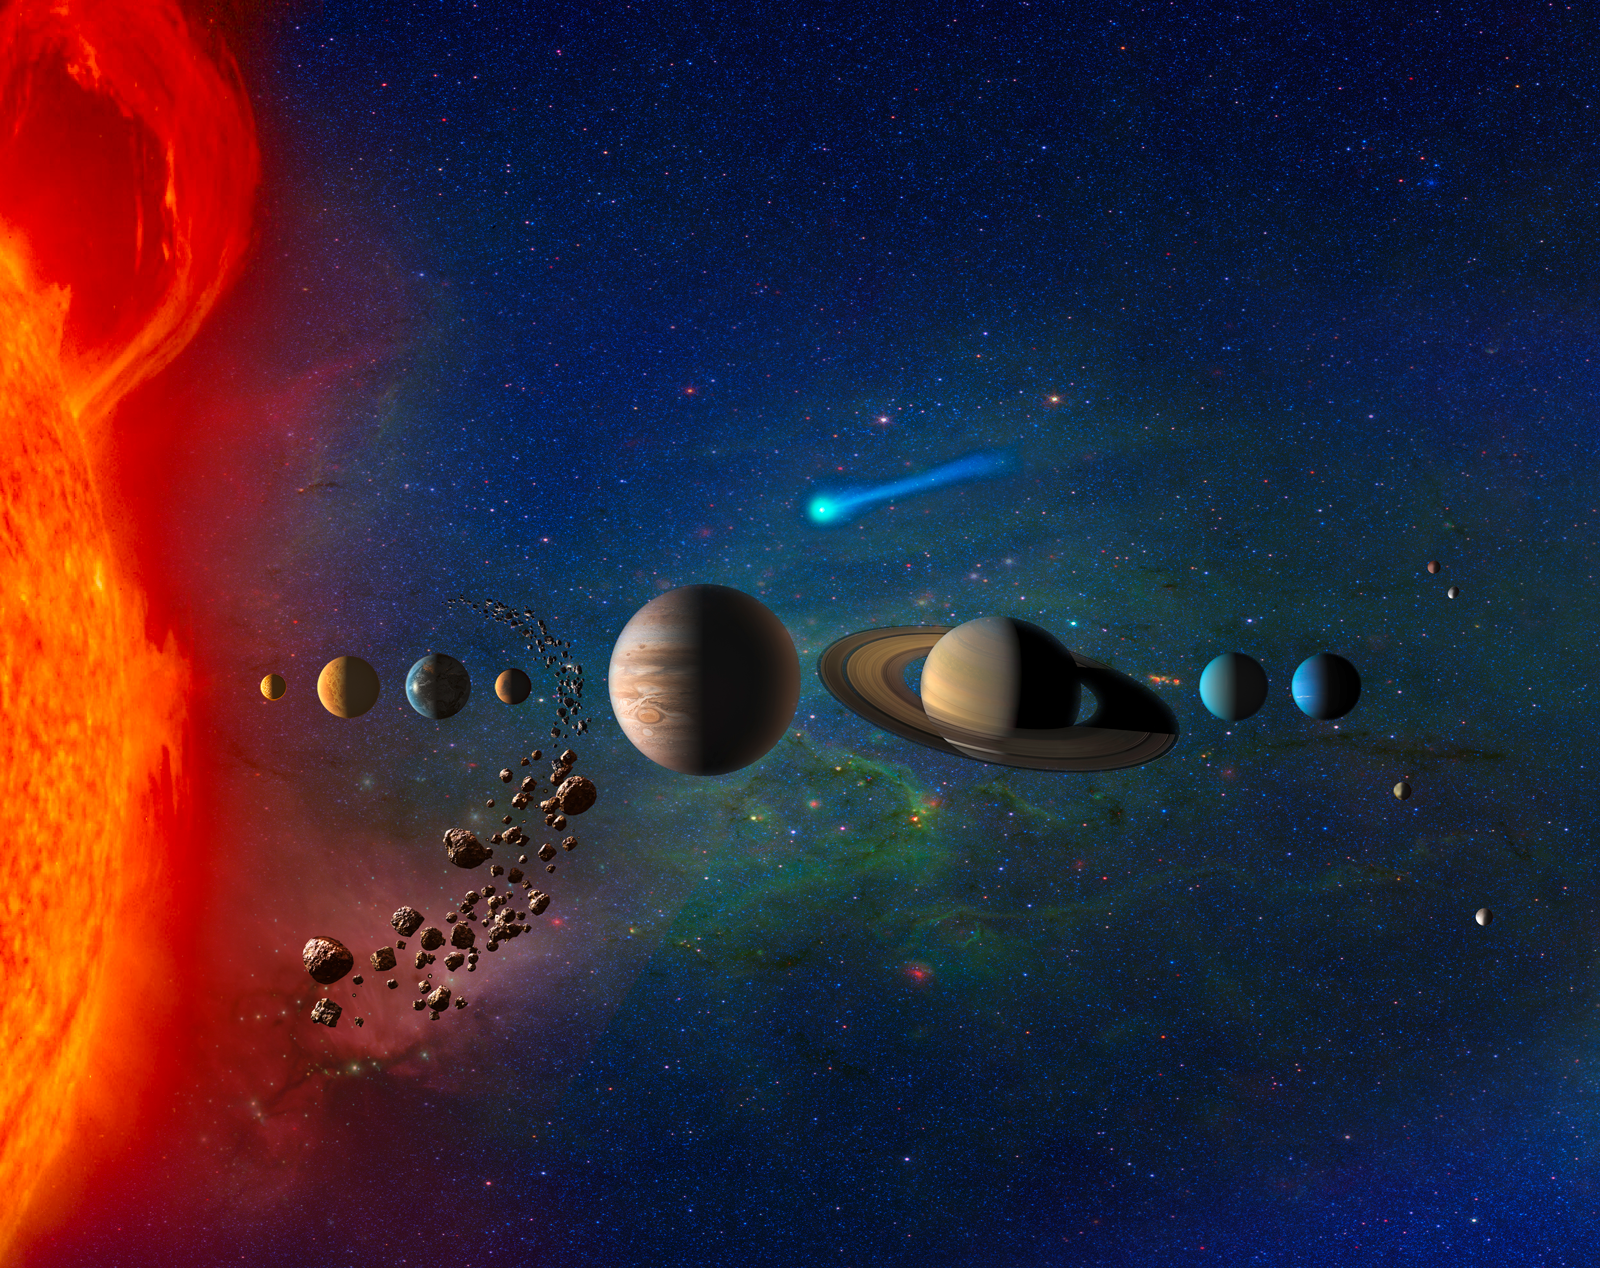 an artistic rendering of our solar system